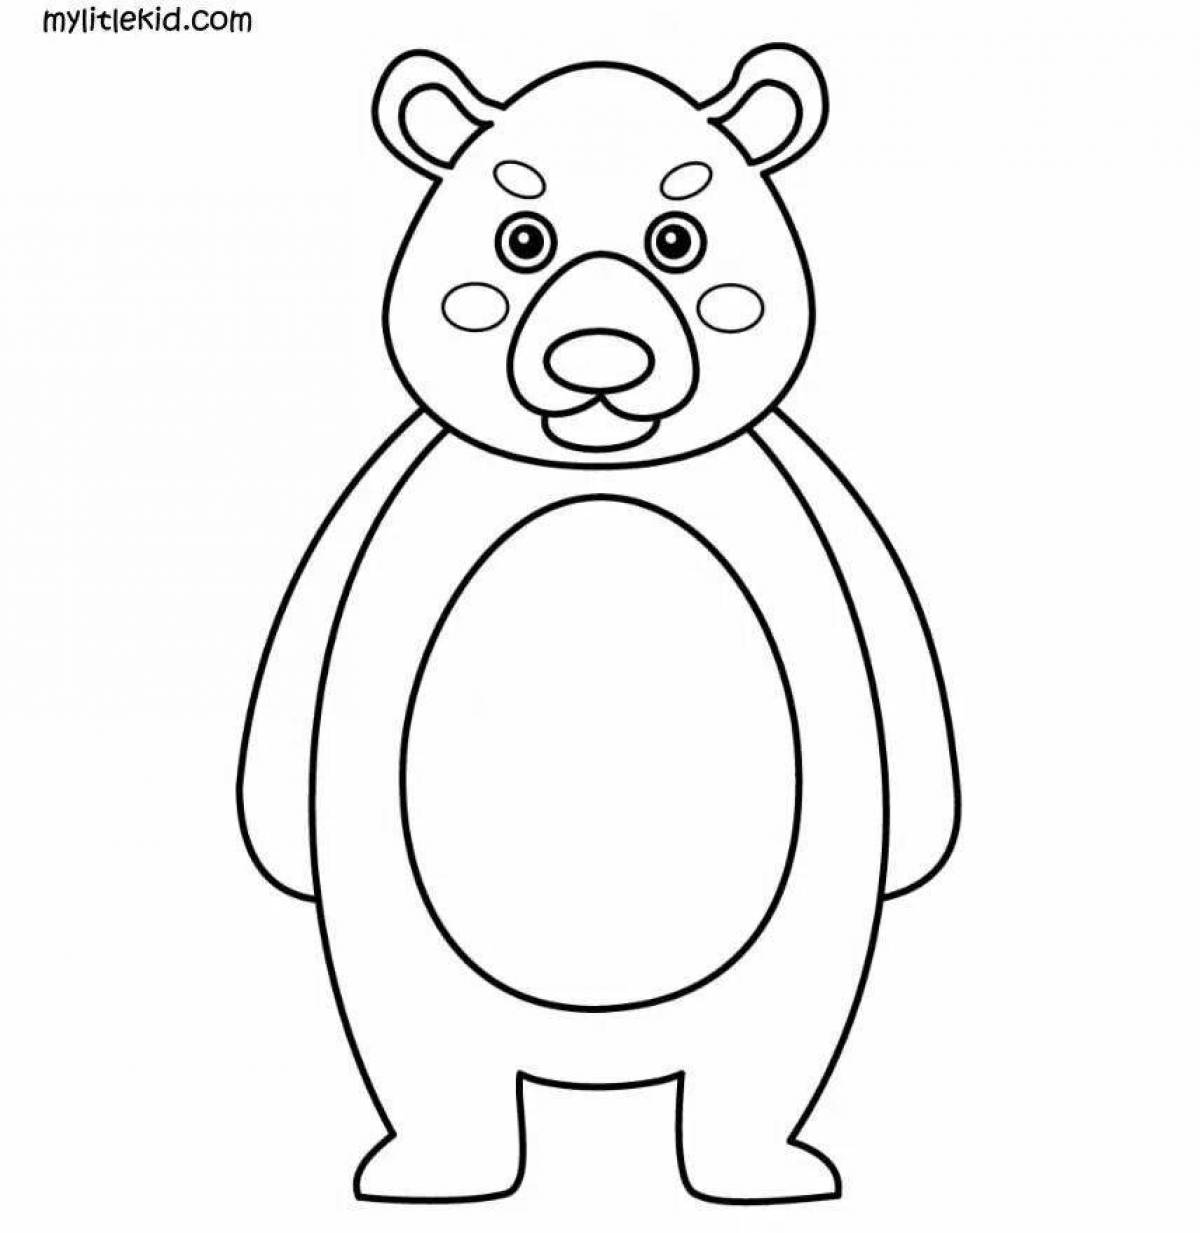 Colorful teddy bear coloring book for 2-3 year olds